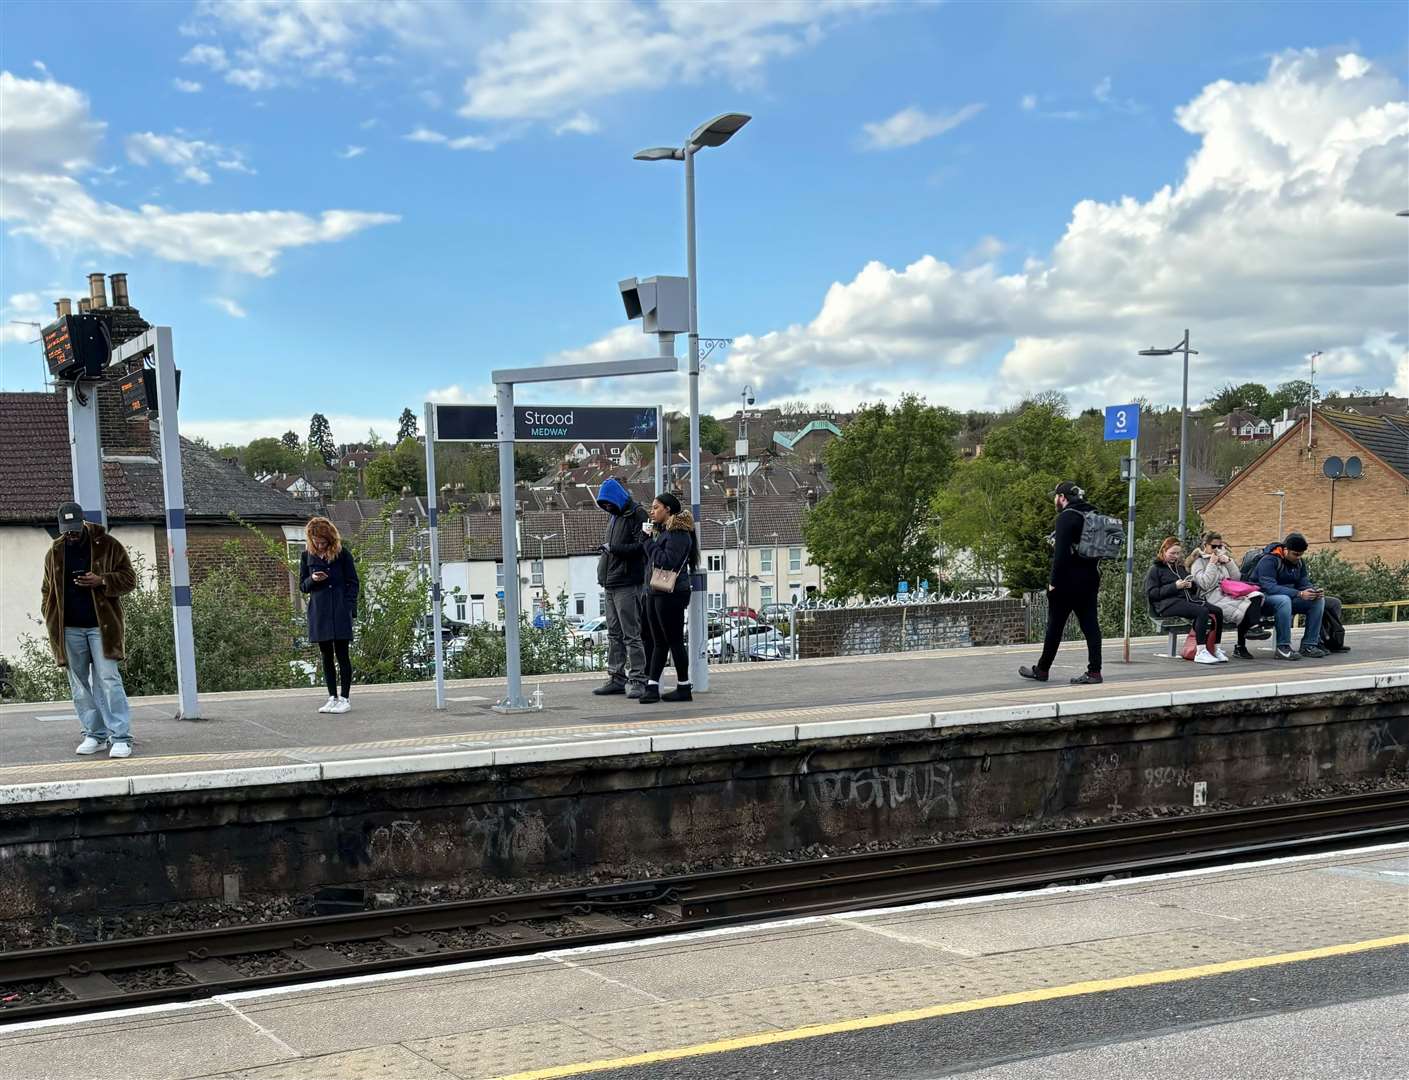 Some passengers were stuck at Strood station due to the delays